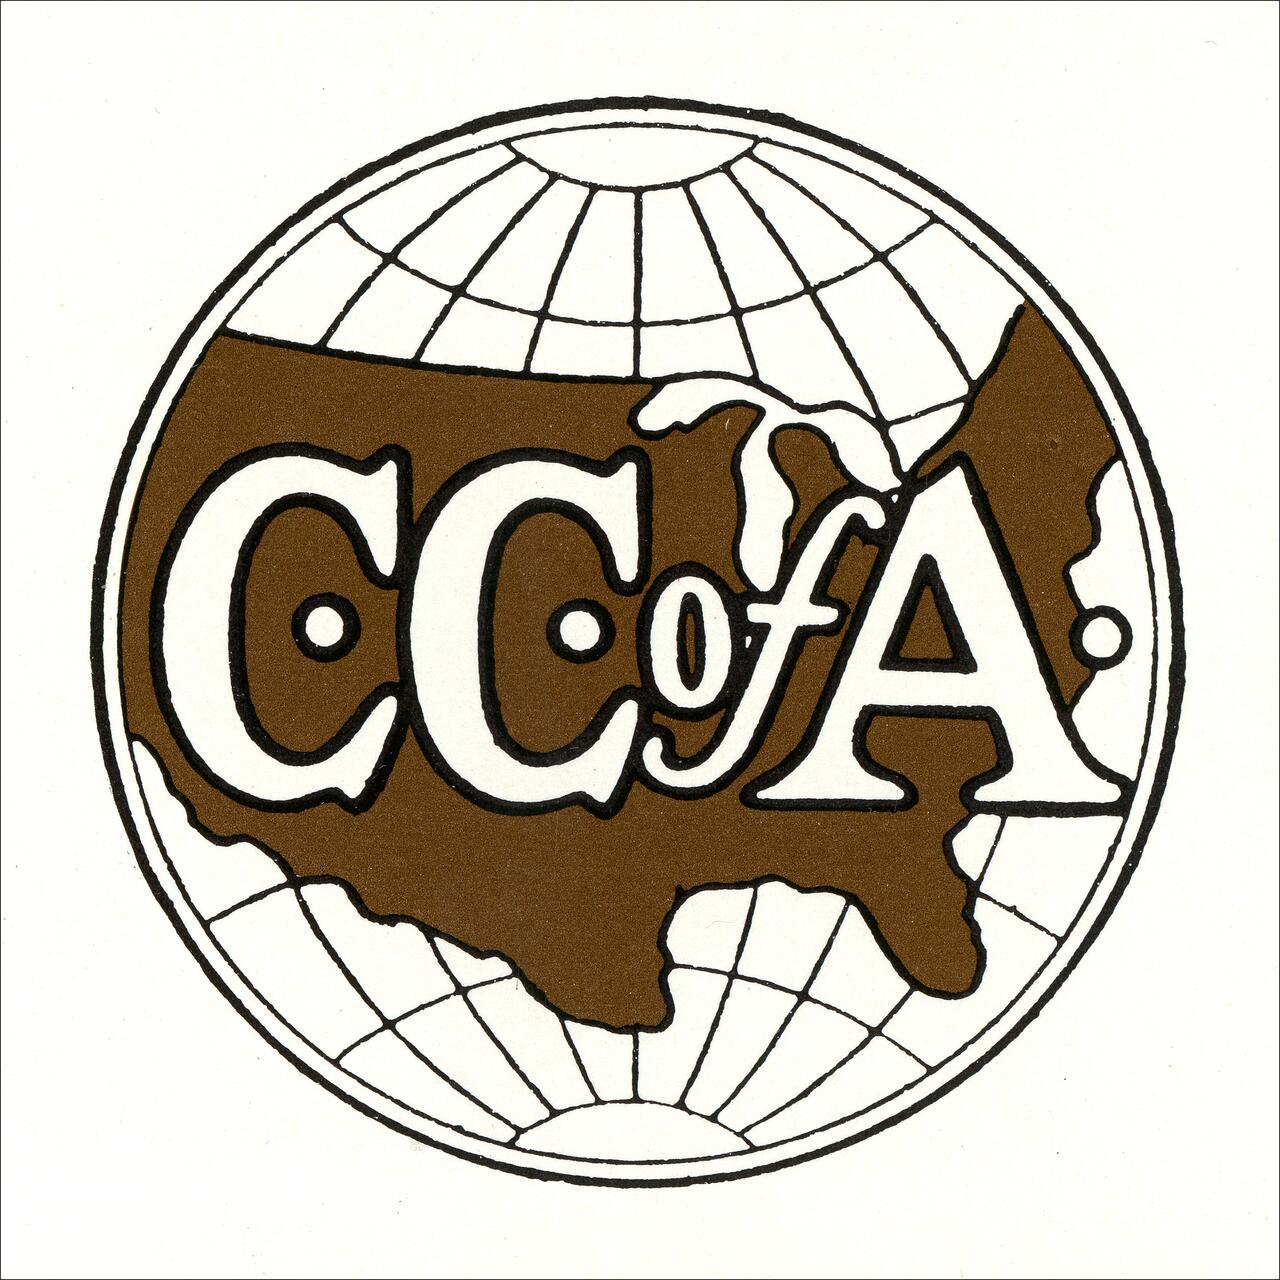 21A-14a_Container Corporation of America Trademark 1920s_Designer Unknown